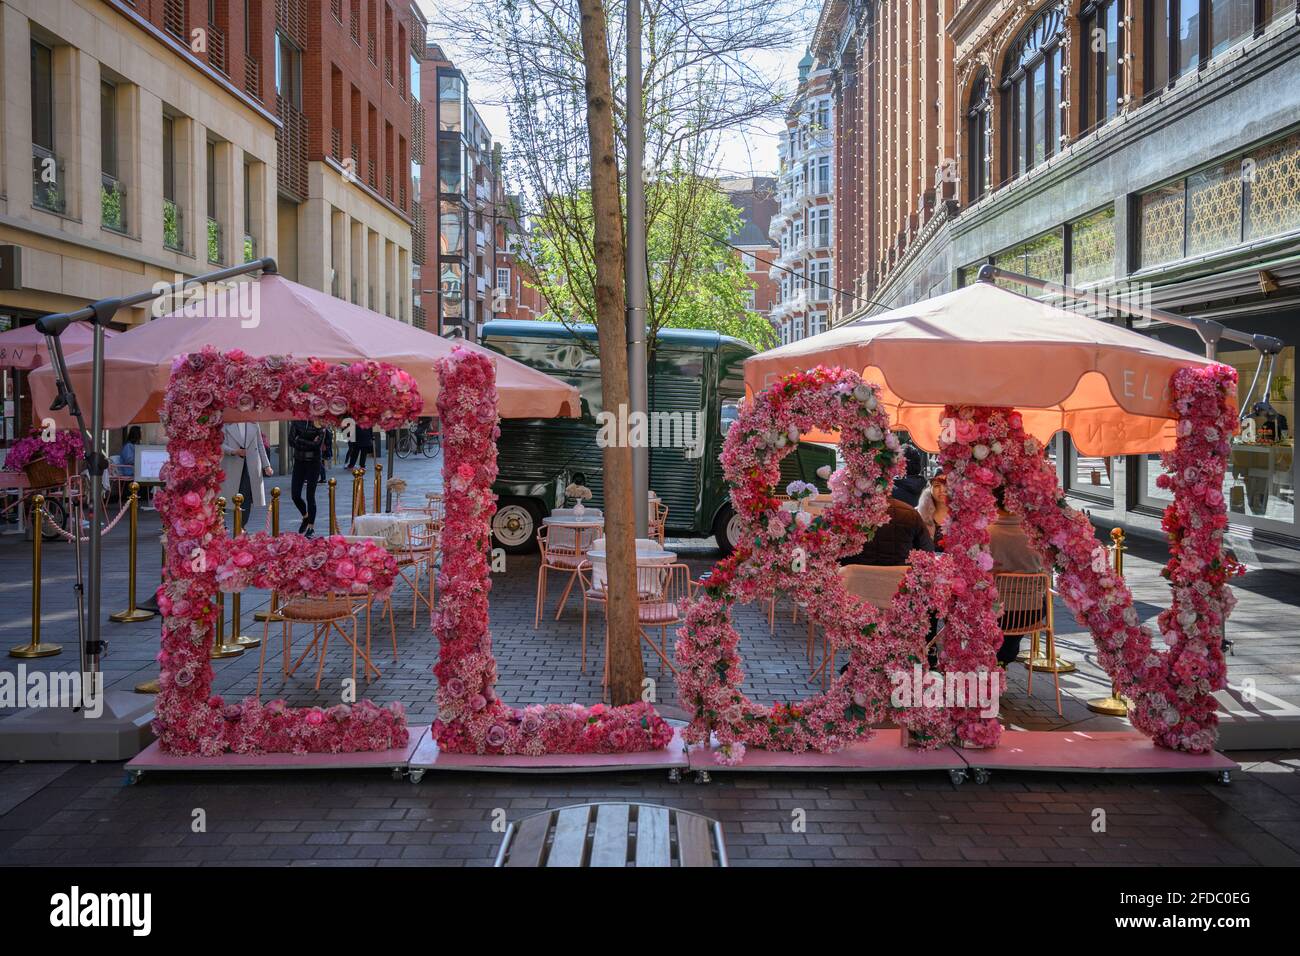 ELAN outdoor cafe area on Hans Crescent outside Harrods, 23 April 2021, Knightsbridge, London during Covid-19 restriction easing Stock Photo